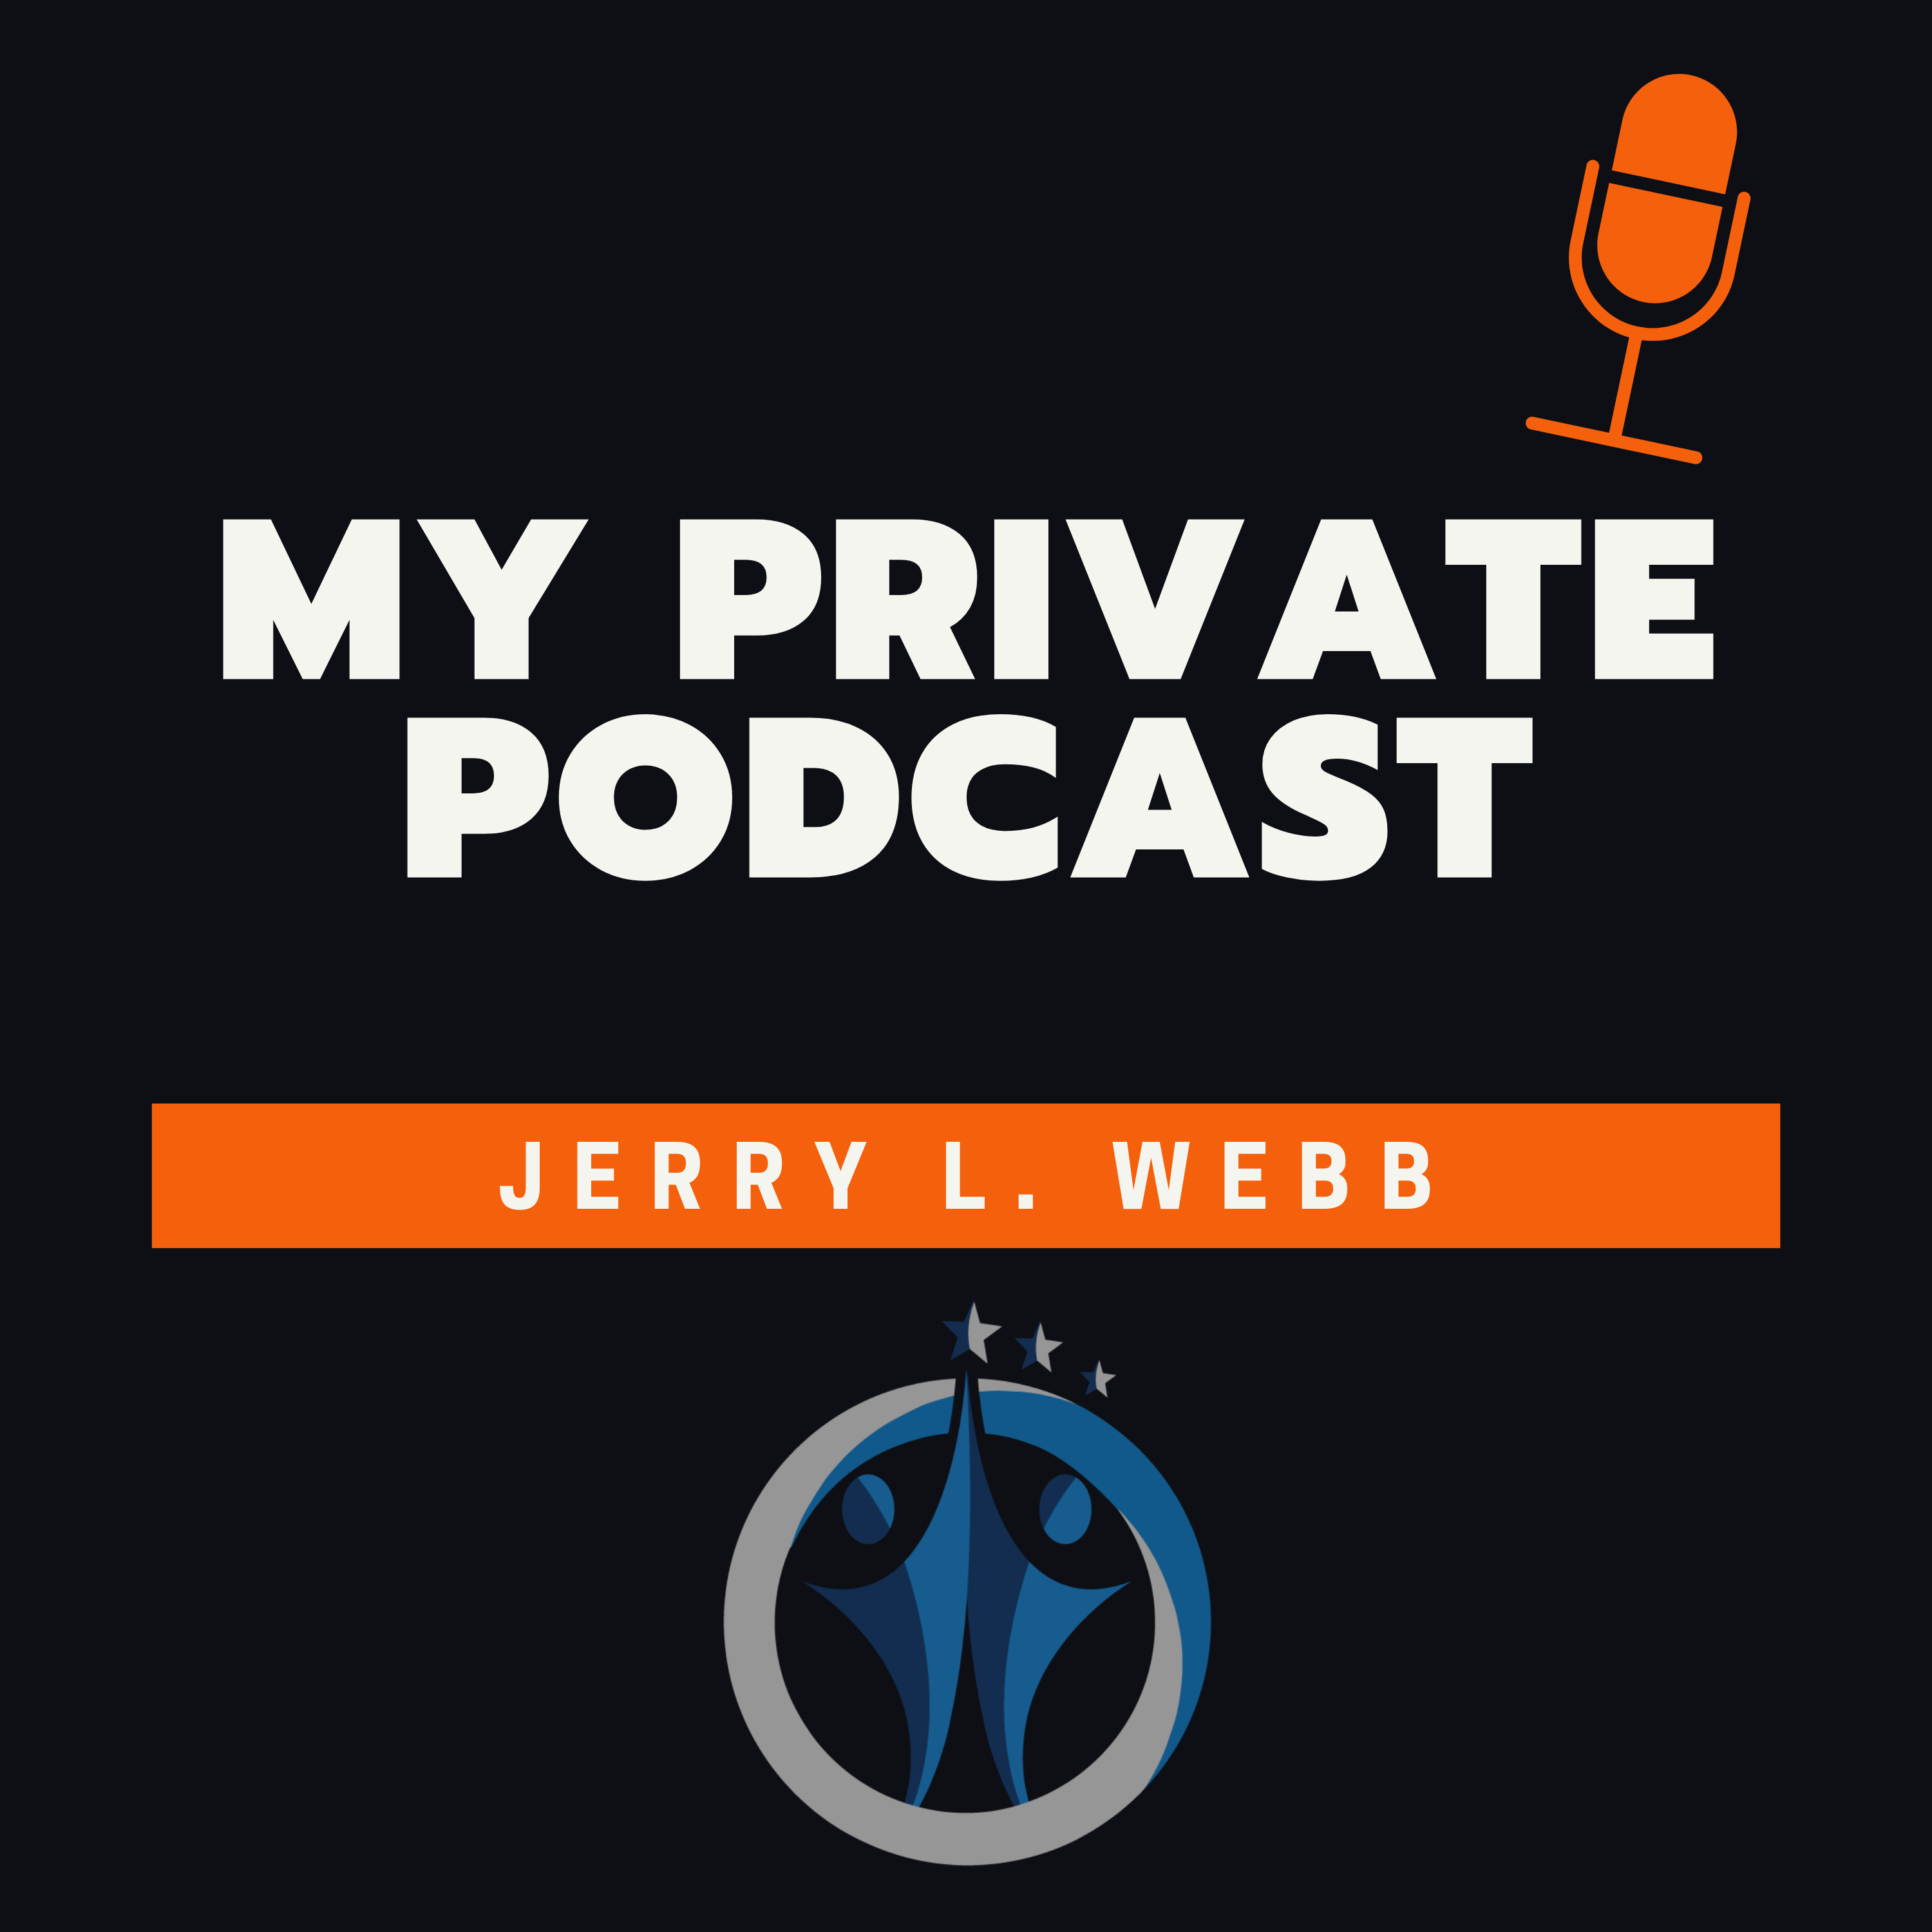 My Private Podcast